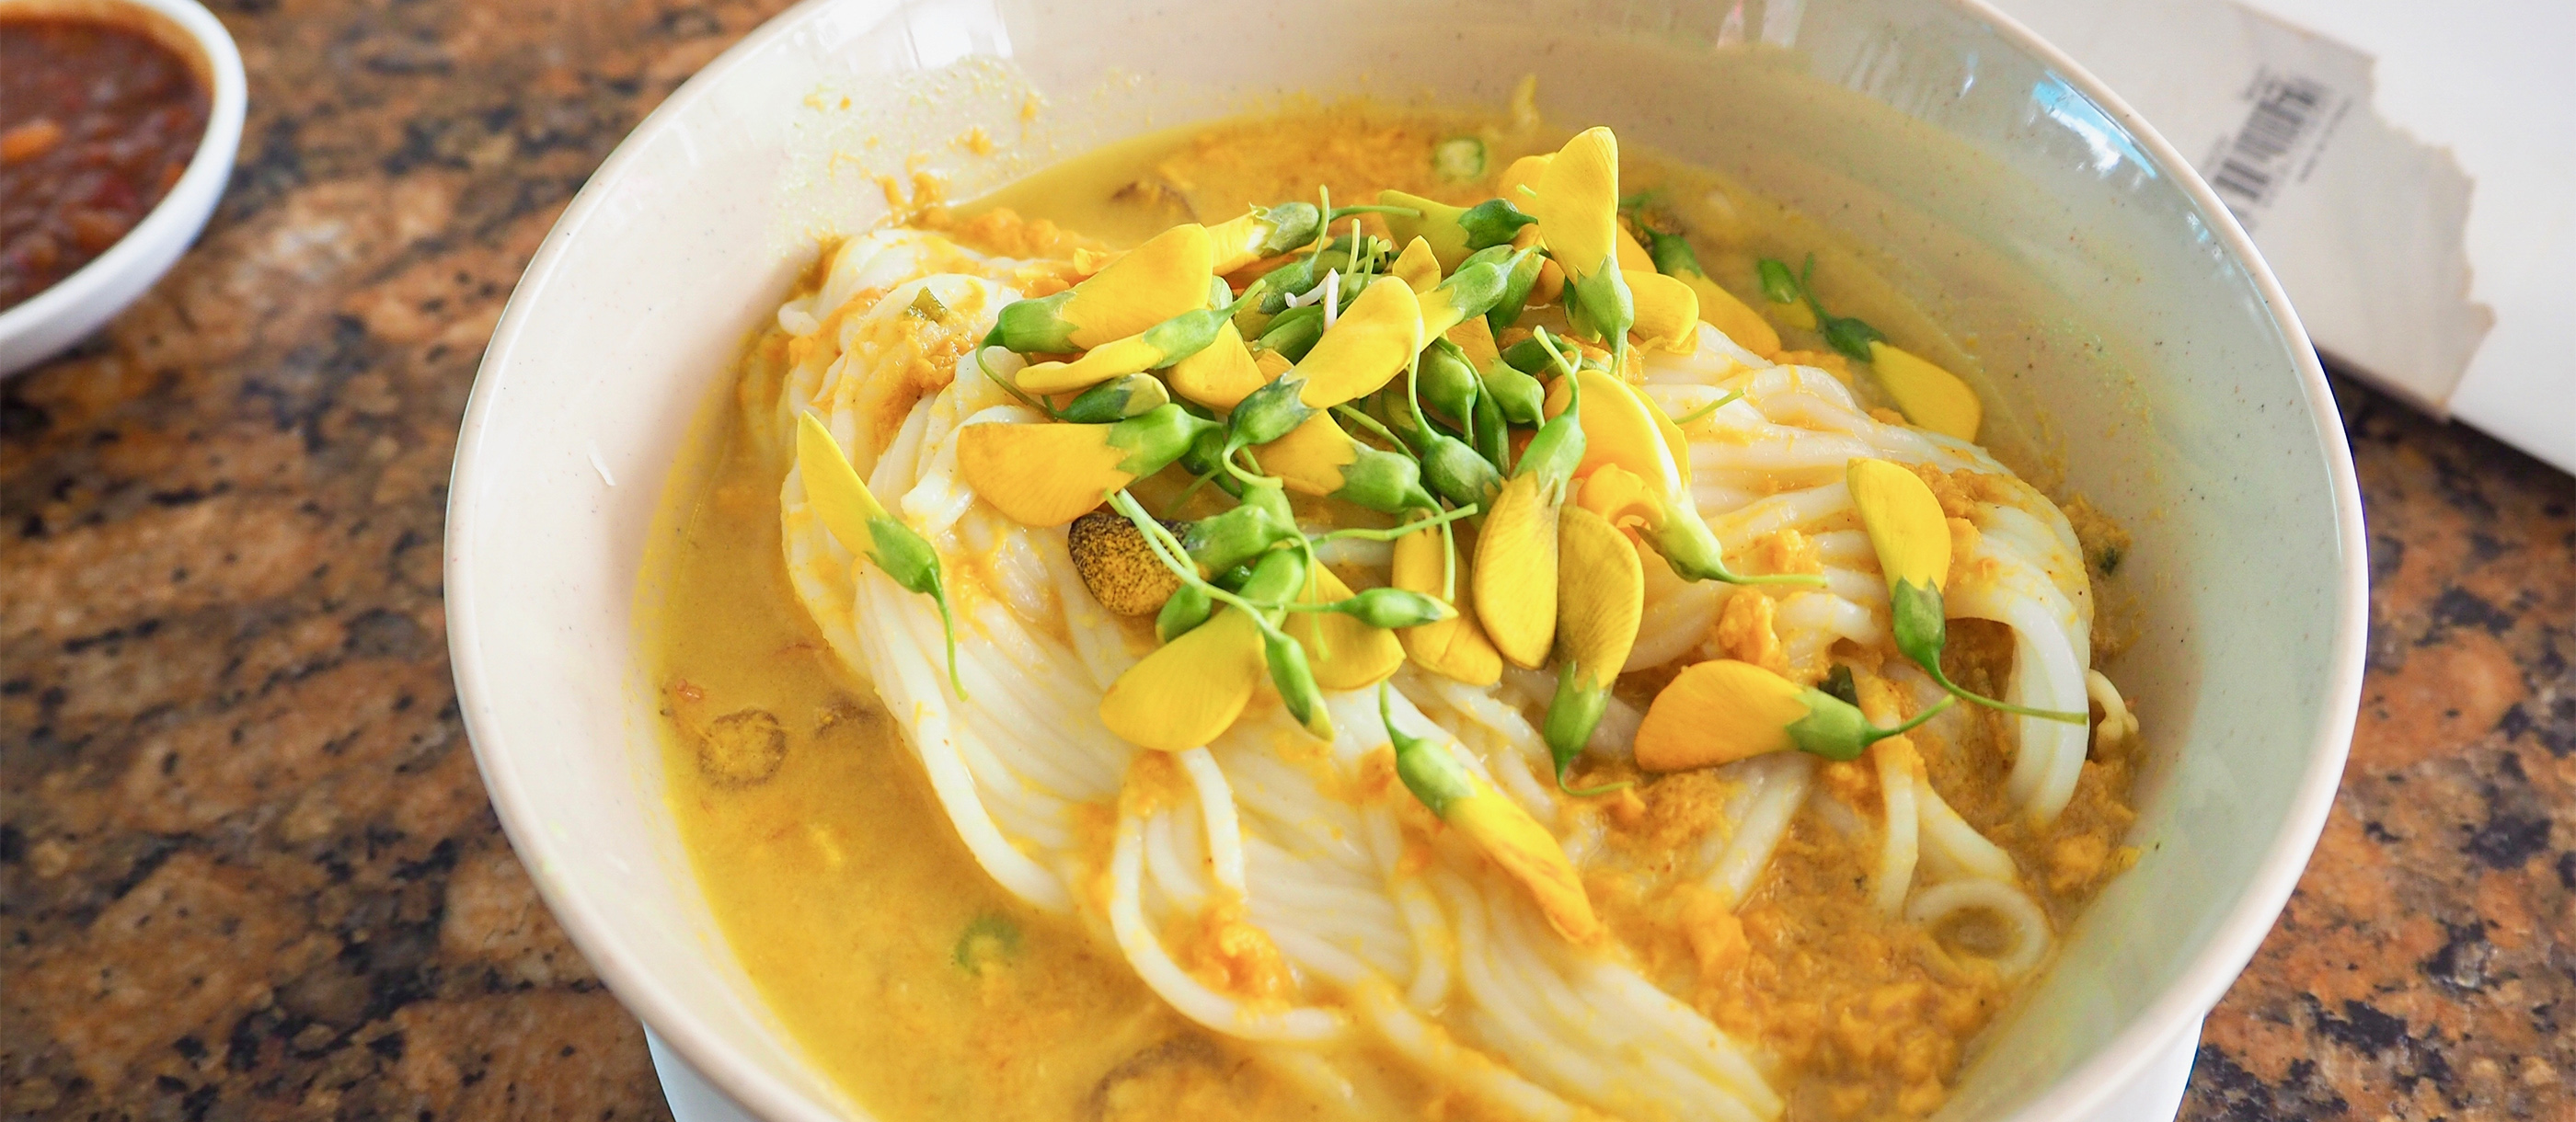 Num Banh Chok | Traditional Noodle Dish From Cambodia, Southeast Asia